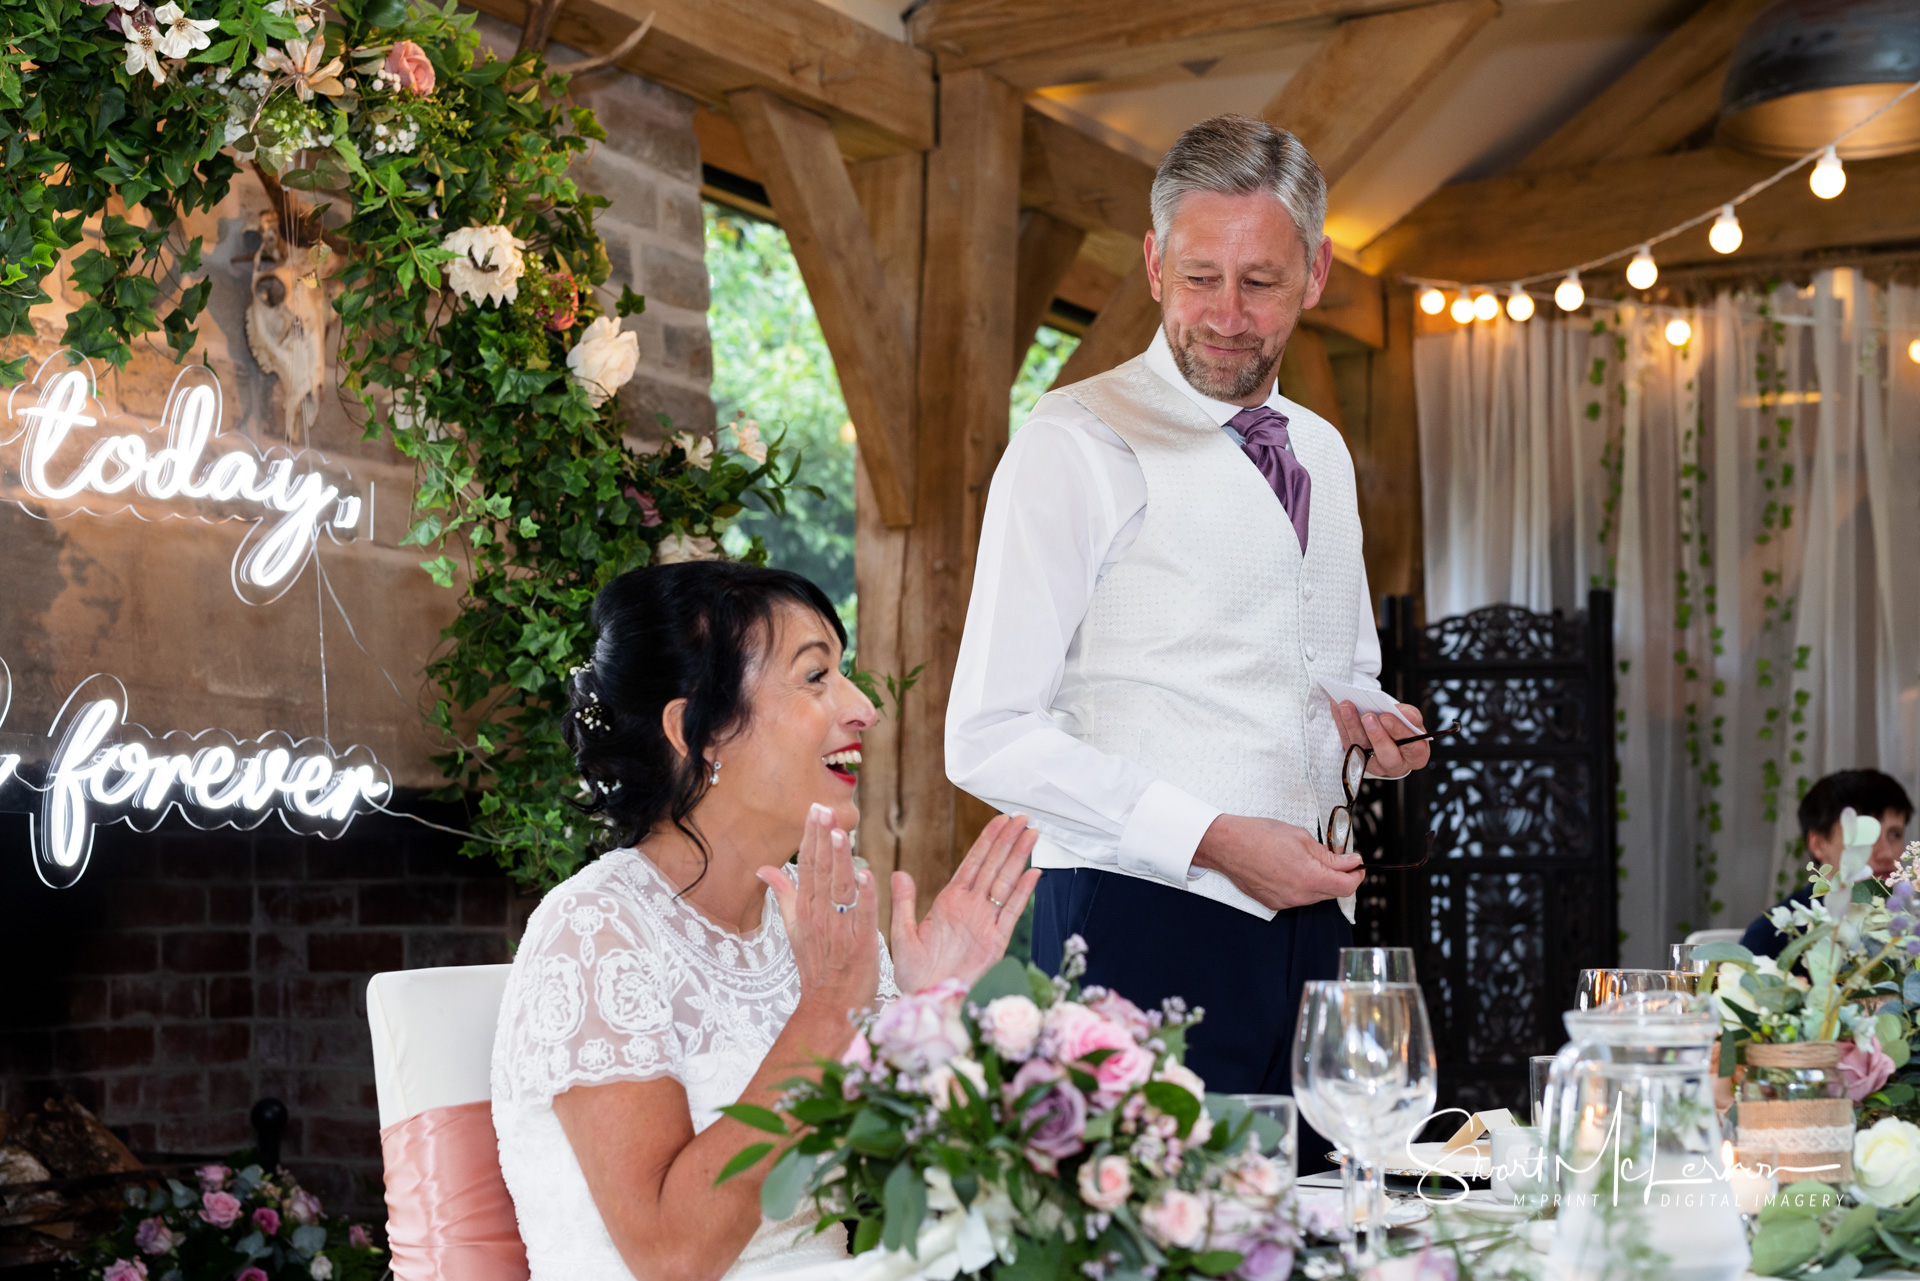 A loving moment during the wedding speech at The White Hart Inn at Lydgate